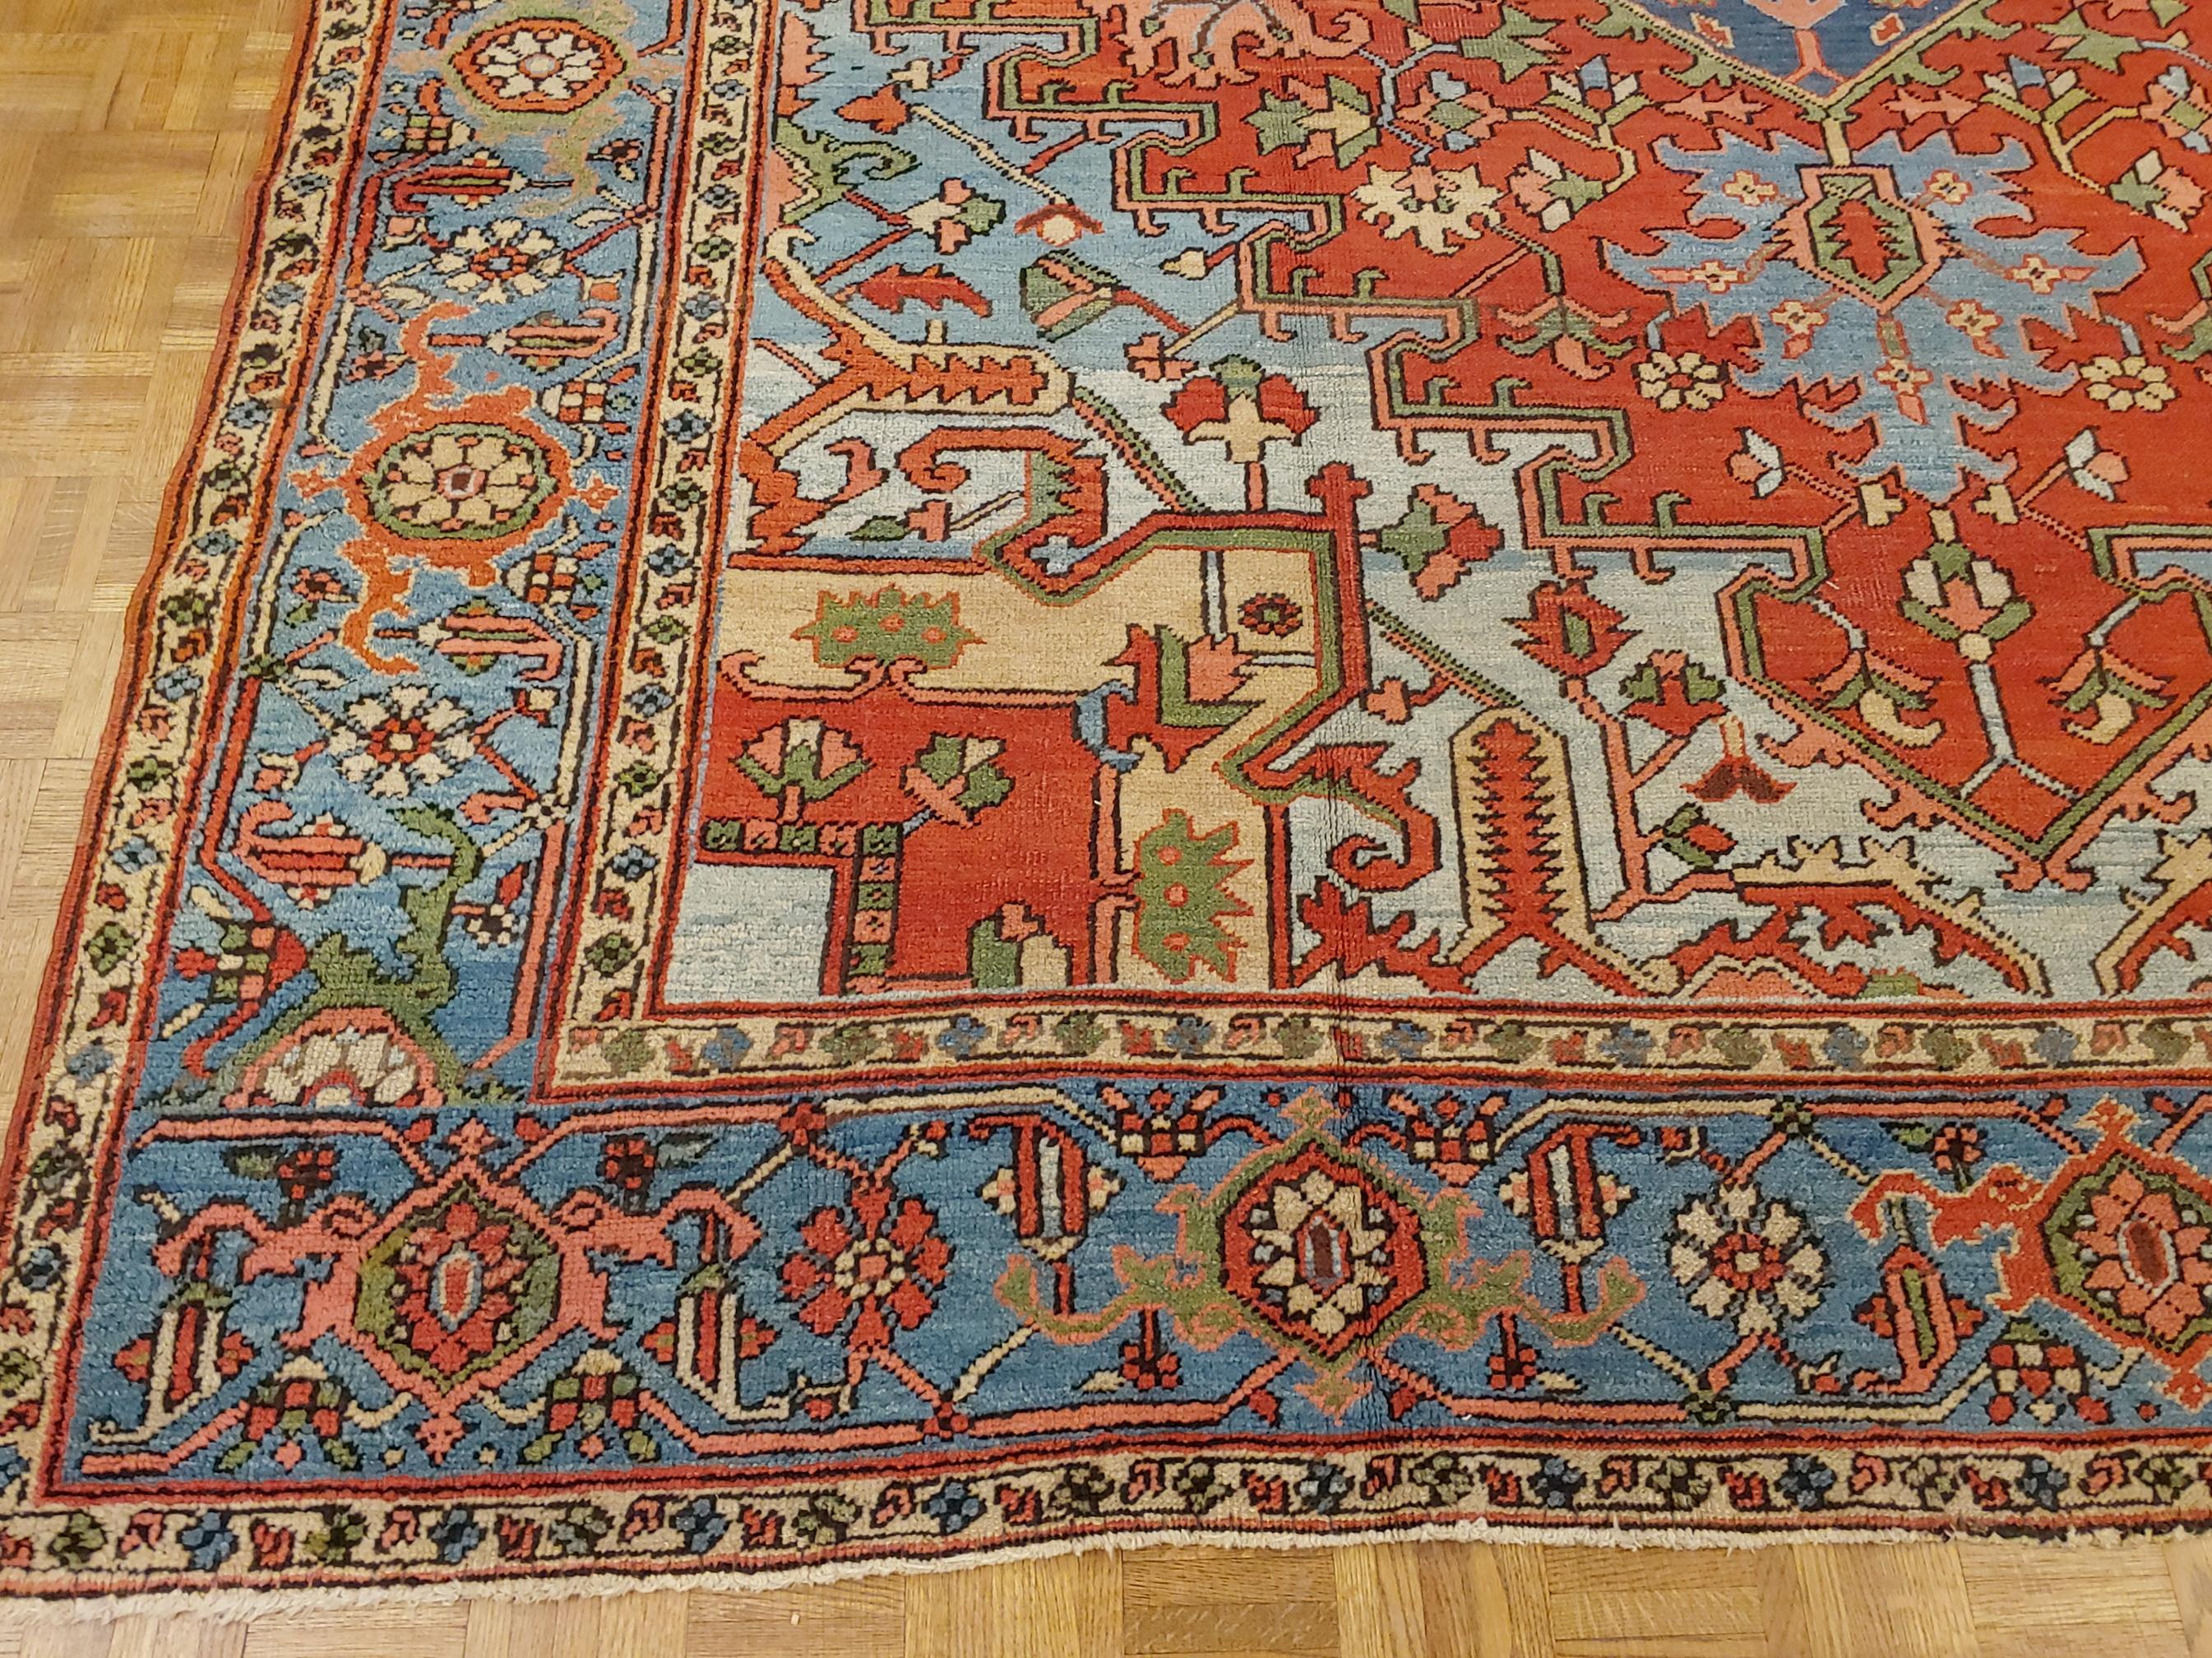 Woven Antique Persian Heriz Rug, Rust Colored with Light Blue Wool, Room Size